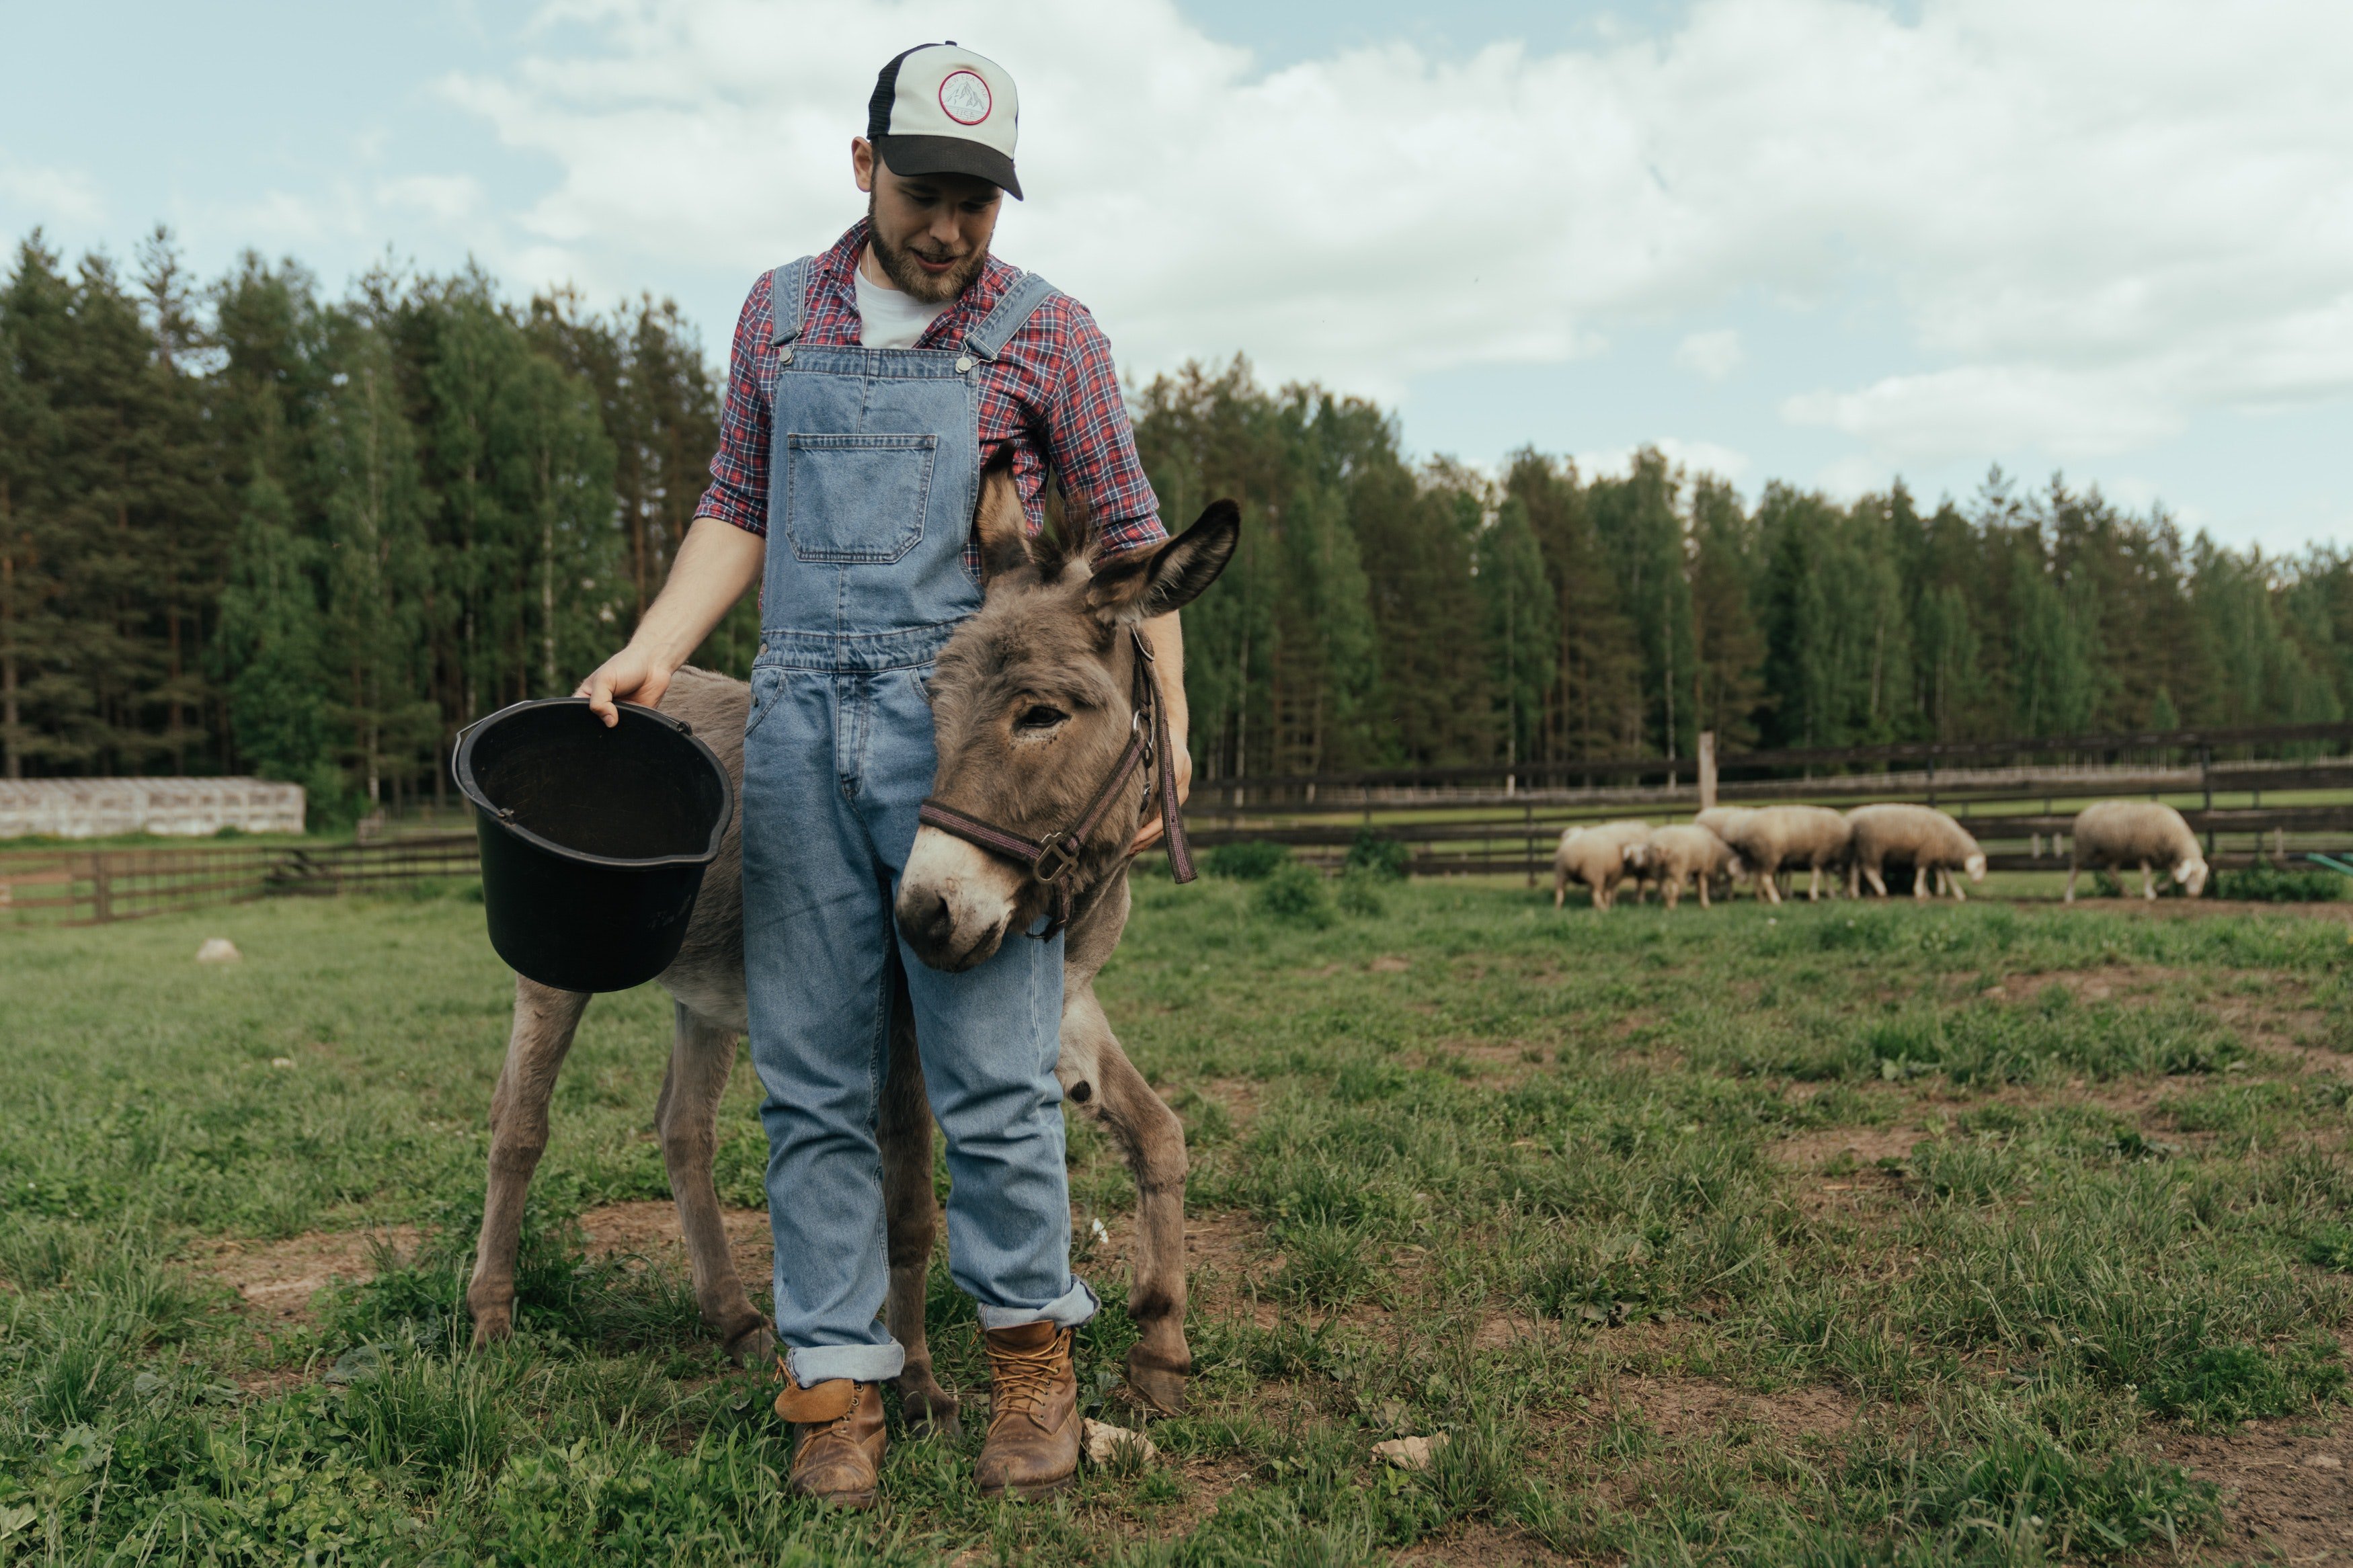 A donkey with a farmer. | Pexels/ cotton bro